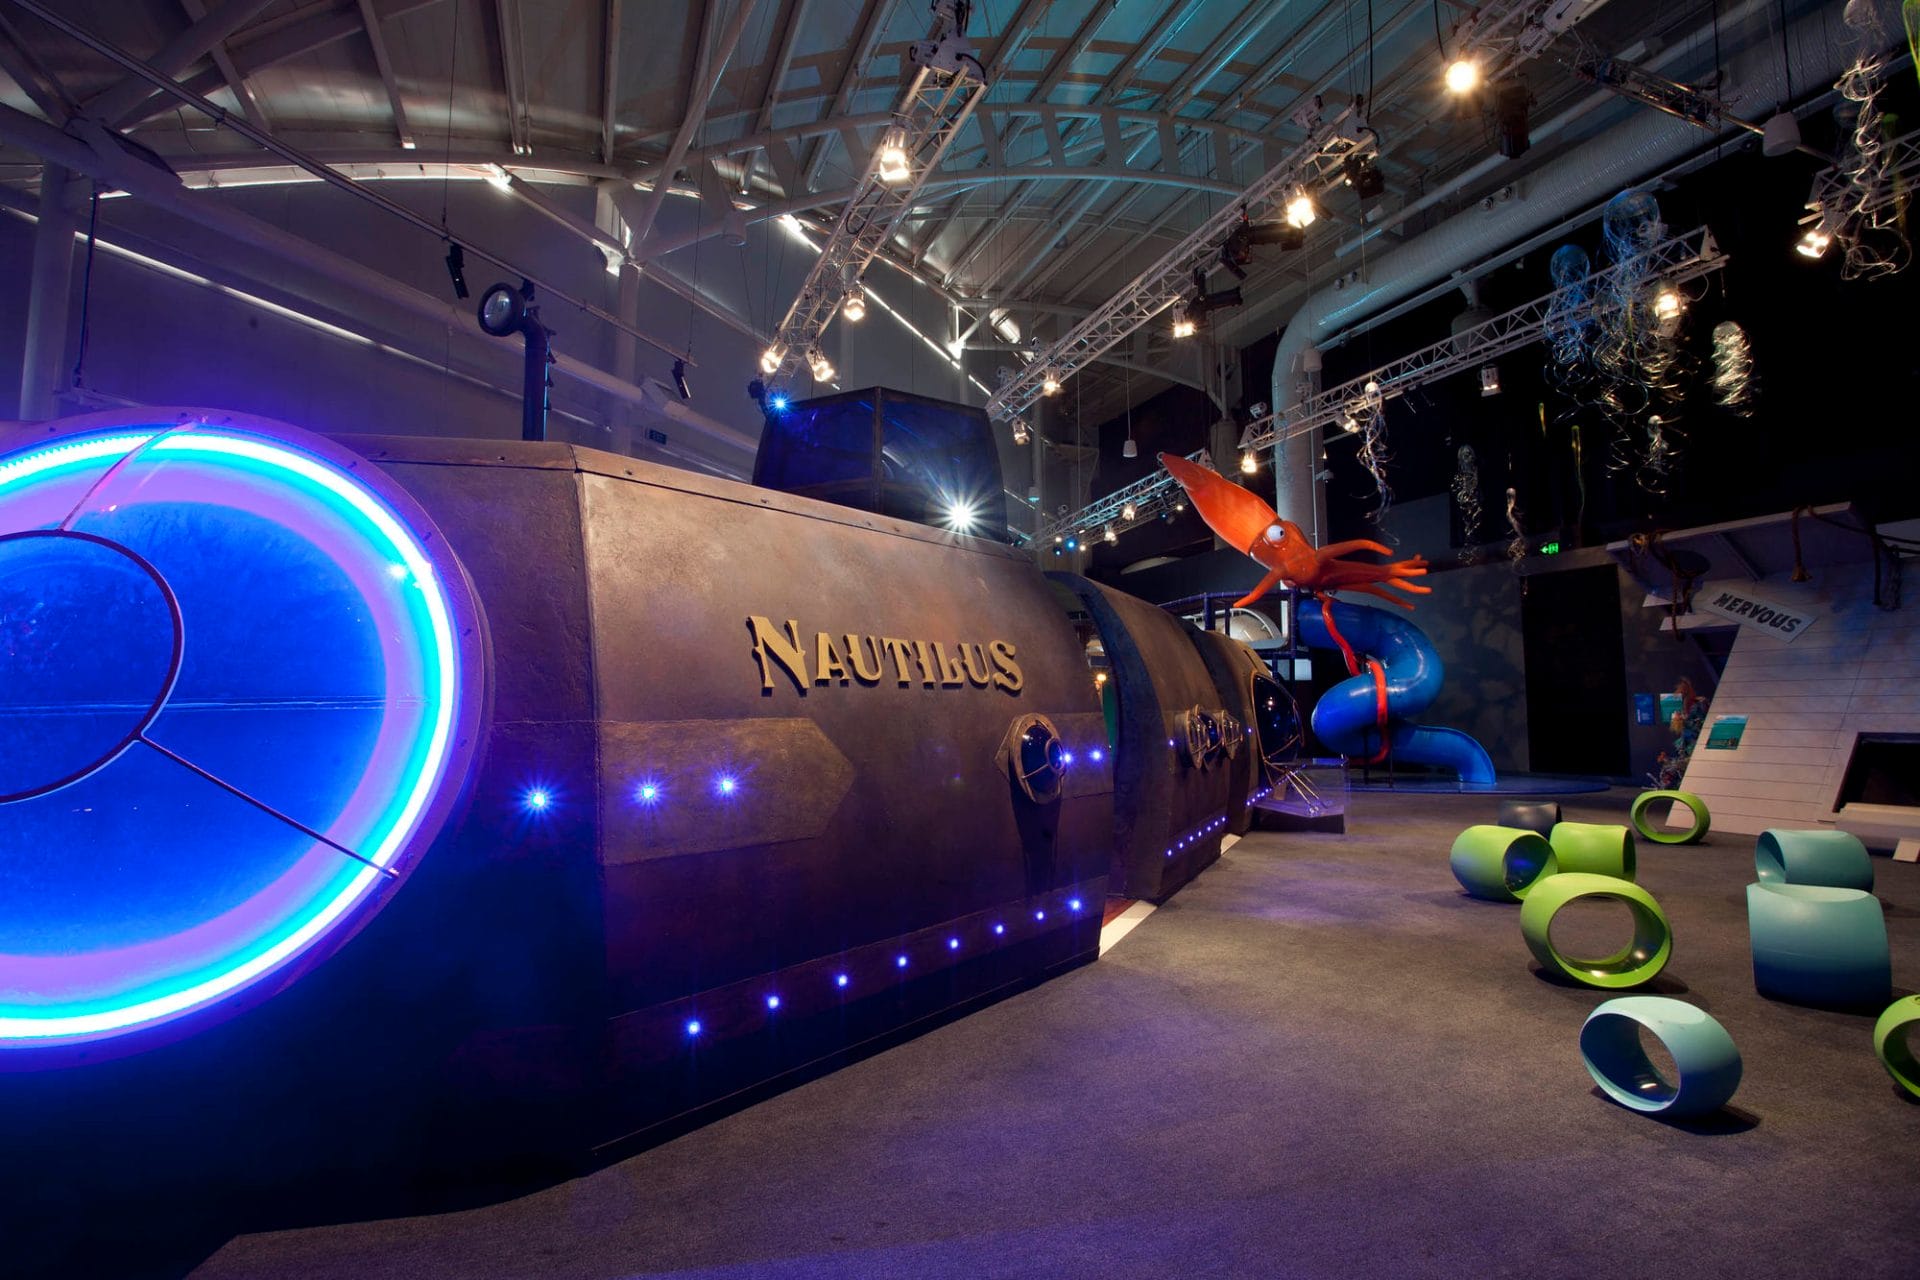 Voyage to the Deep at Nauticus